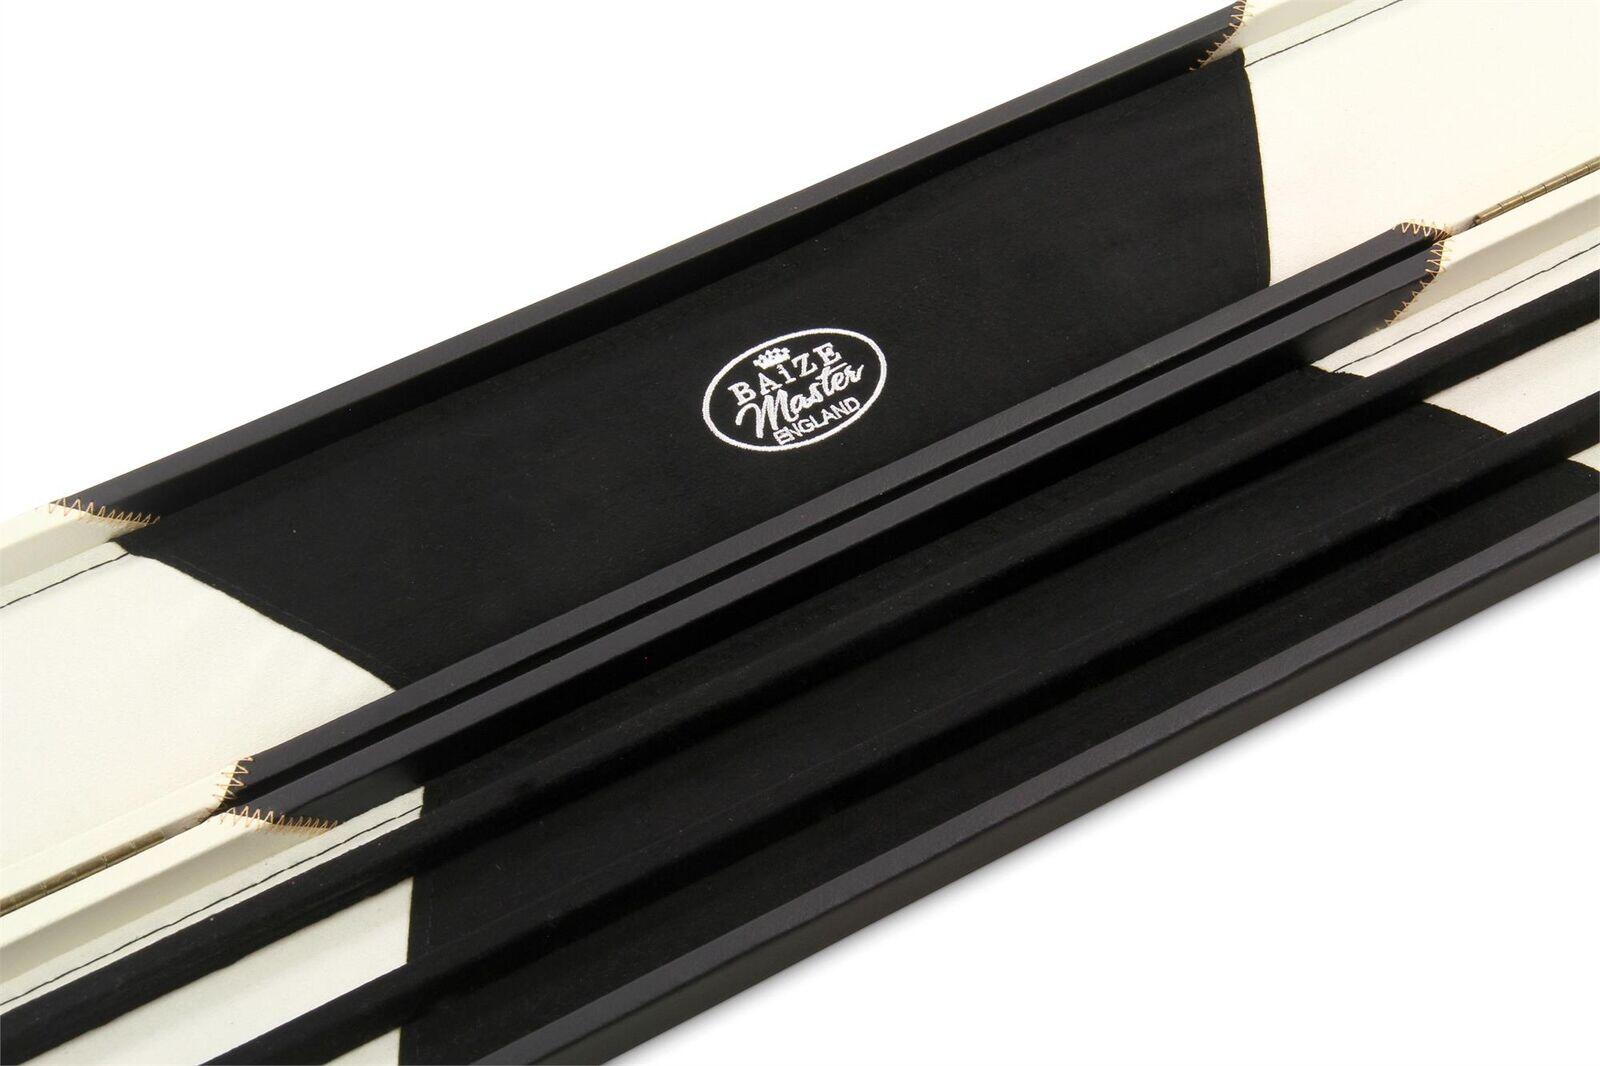 Baize Master 1 Piece WIDE WHITE ARROW Snooker Pool Cue Case - Holds 3 Cues 6/7